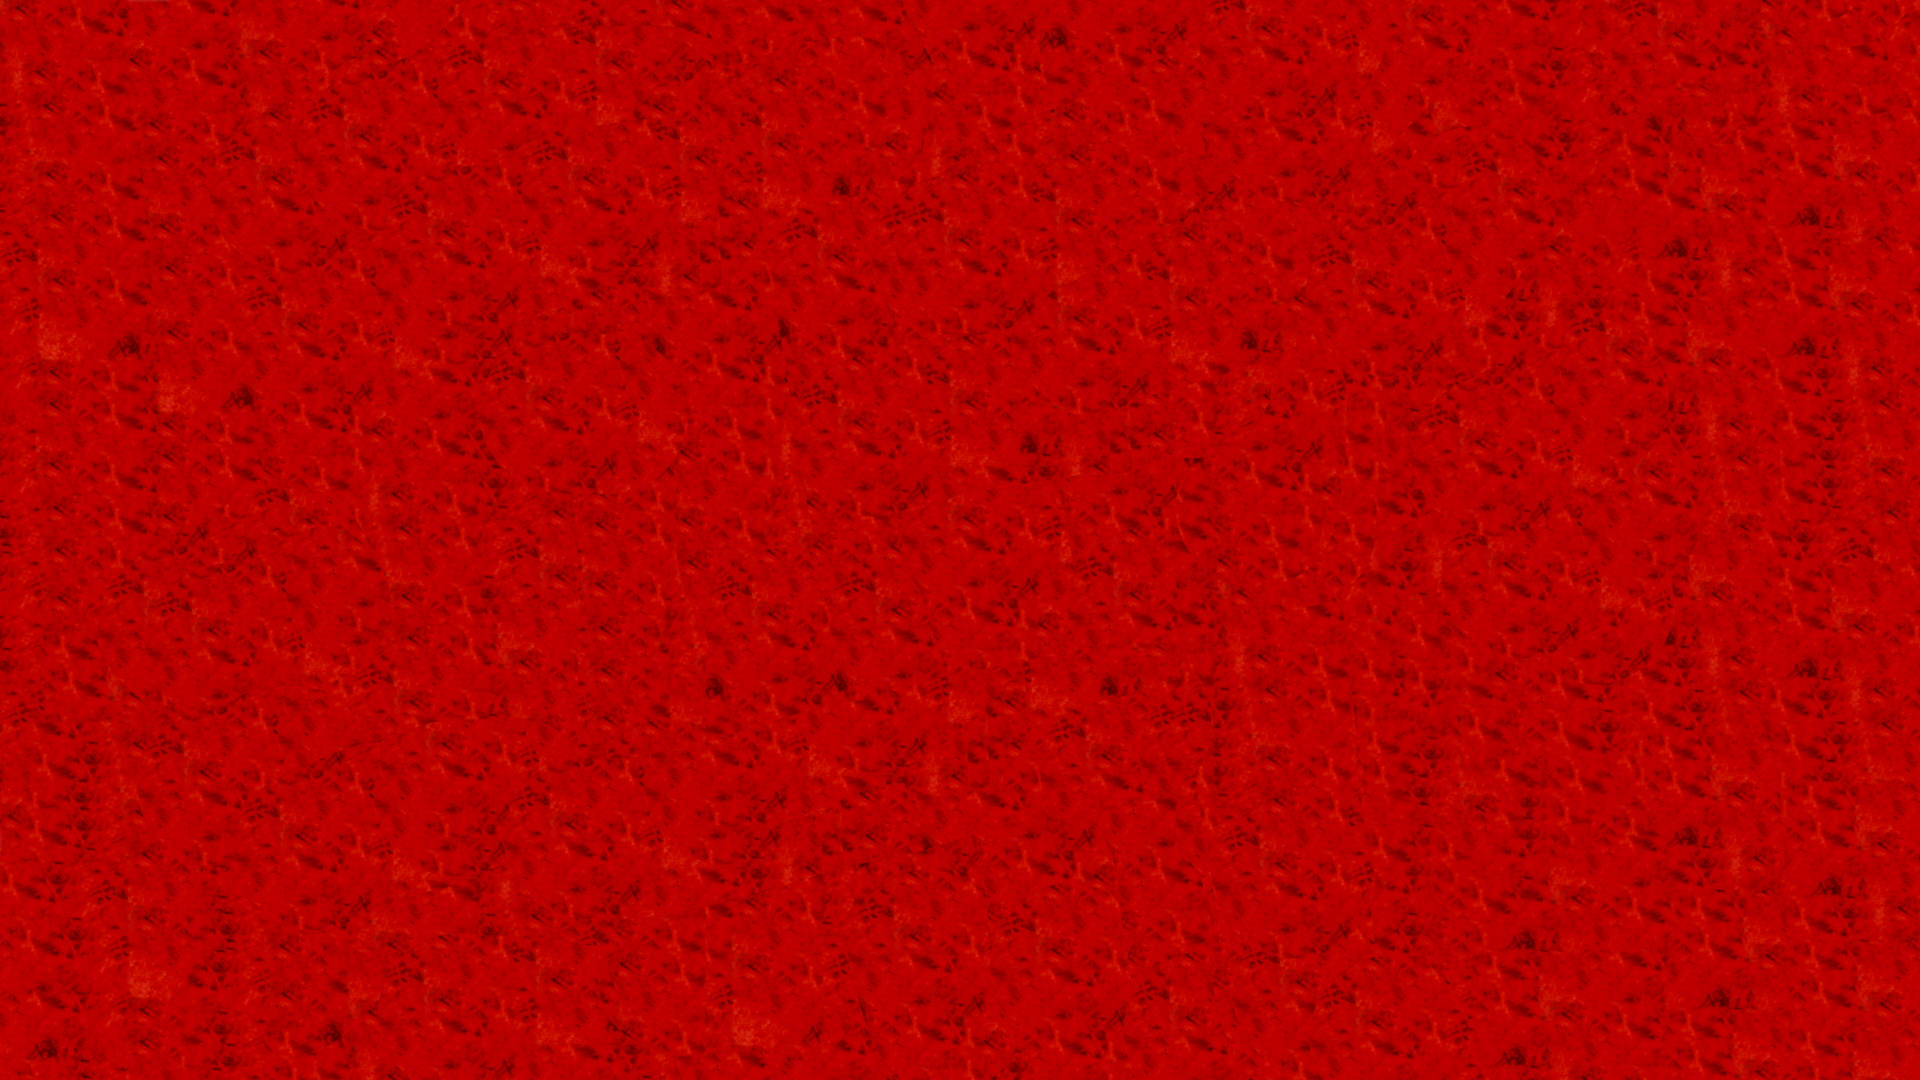 Simple Hd Rough Red Wallpaper